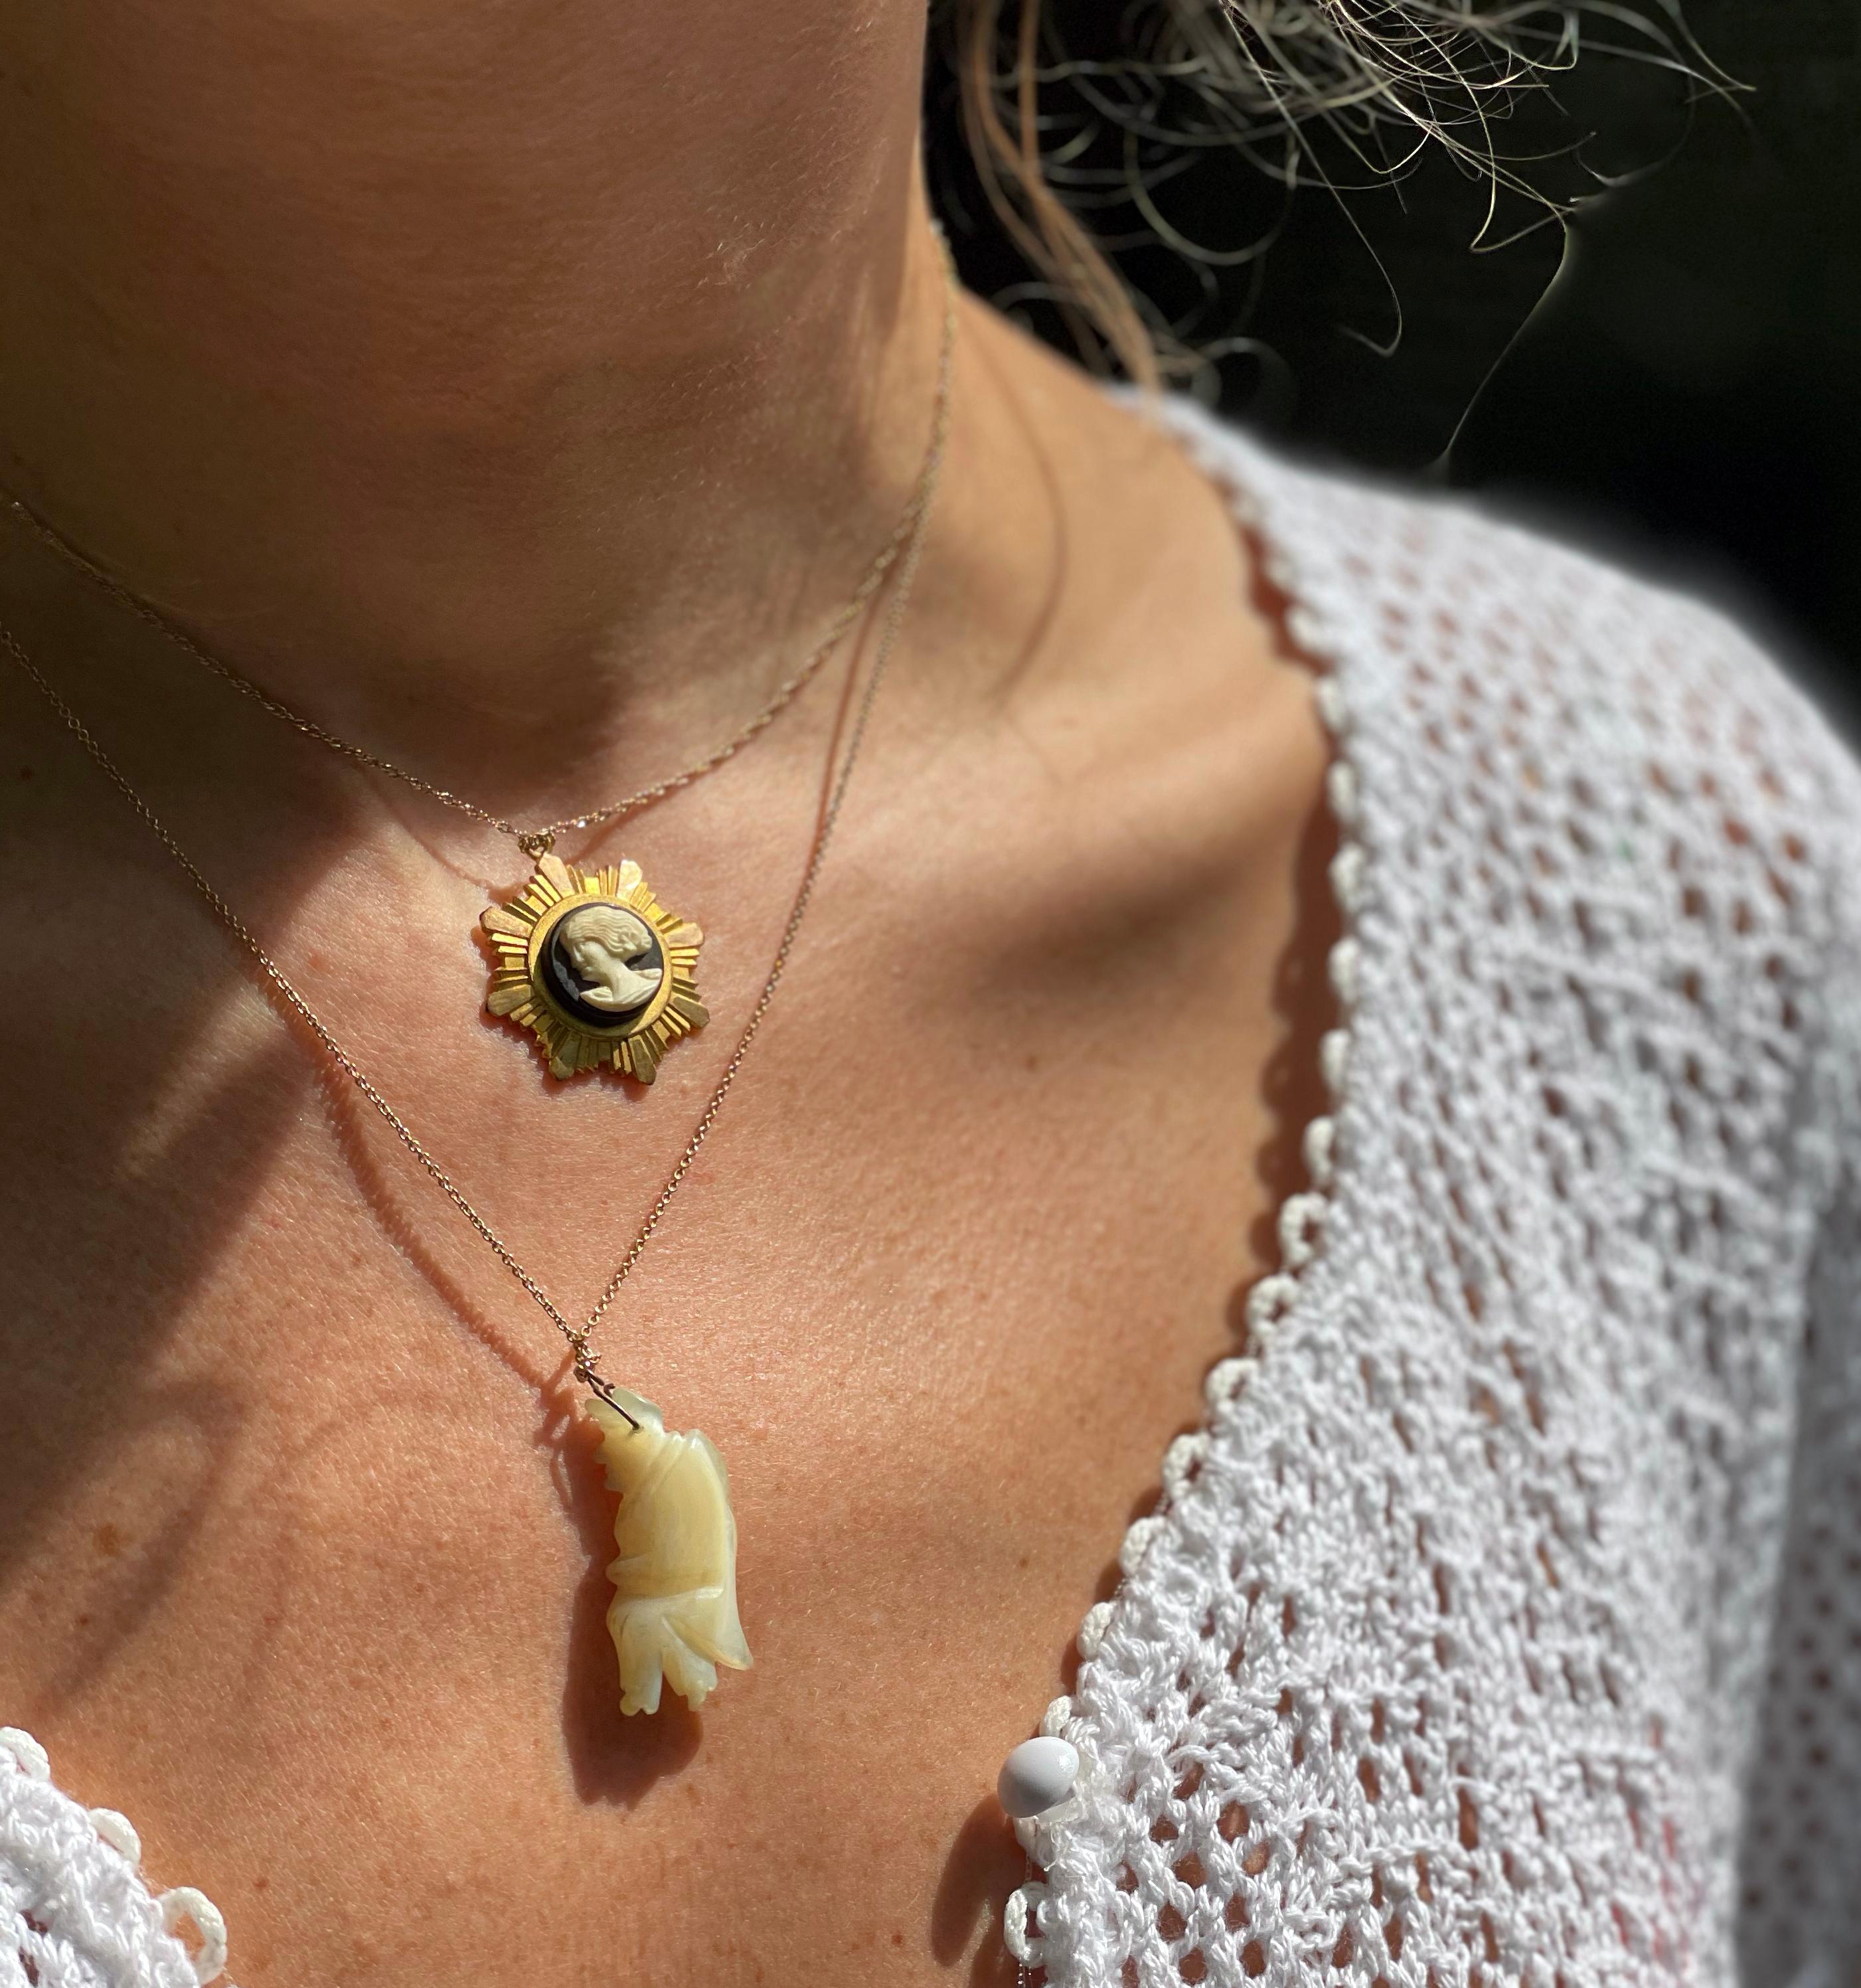 This antique mother of pearl Gobbo charm is a powerful talisman; if you're not familiar with Gobbo charms, they are thought to offer the same protection and good luck as the ubiquitous Italian horn charms.

Il Gobbo, (